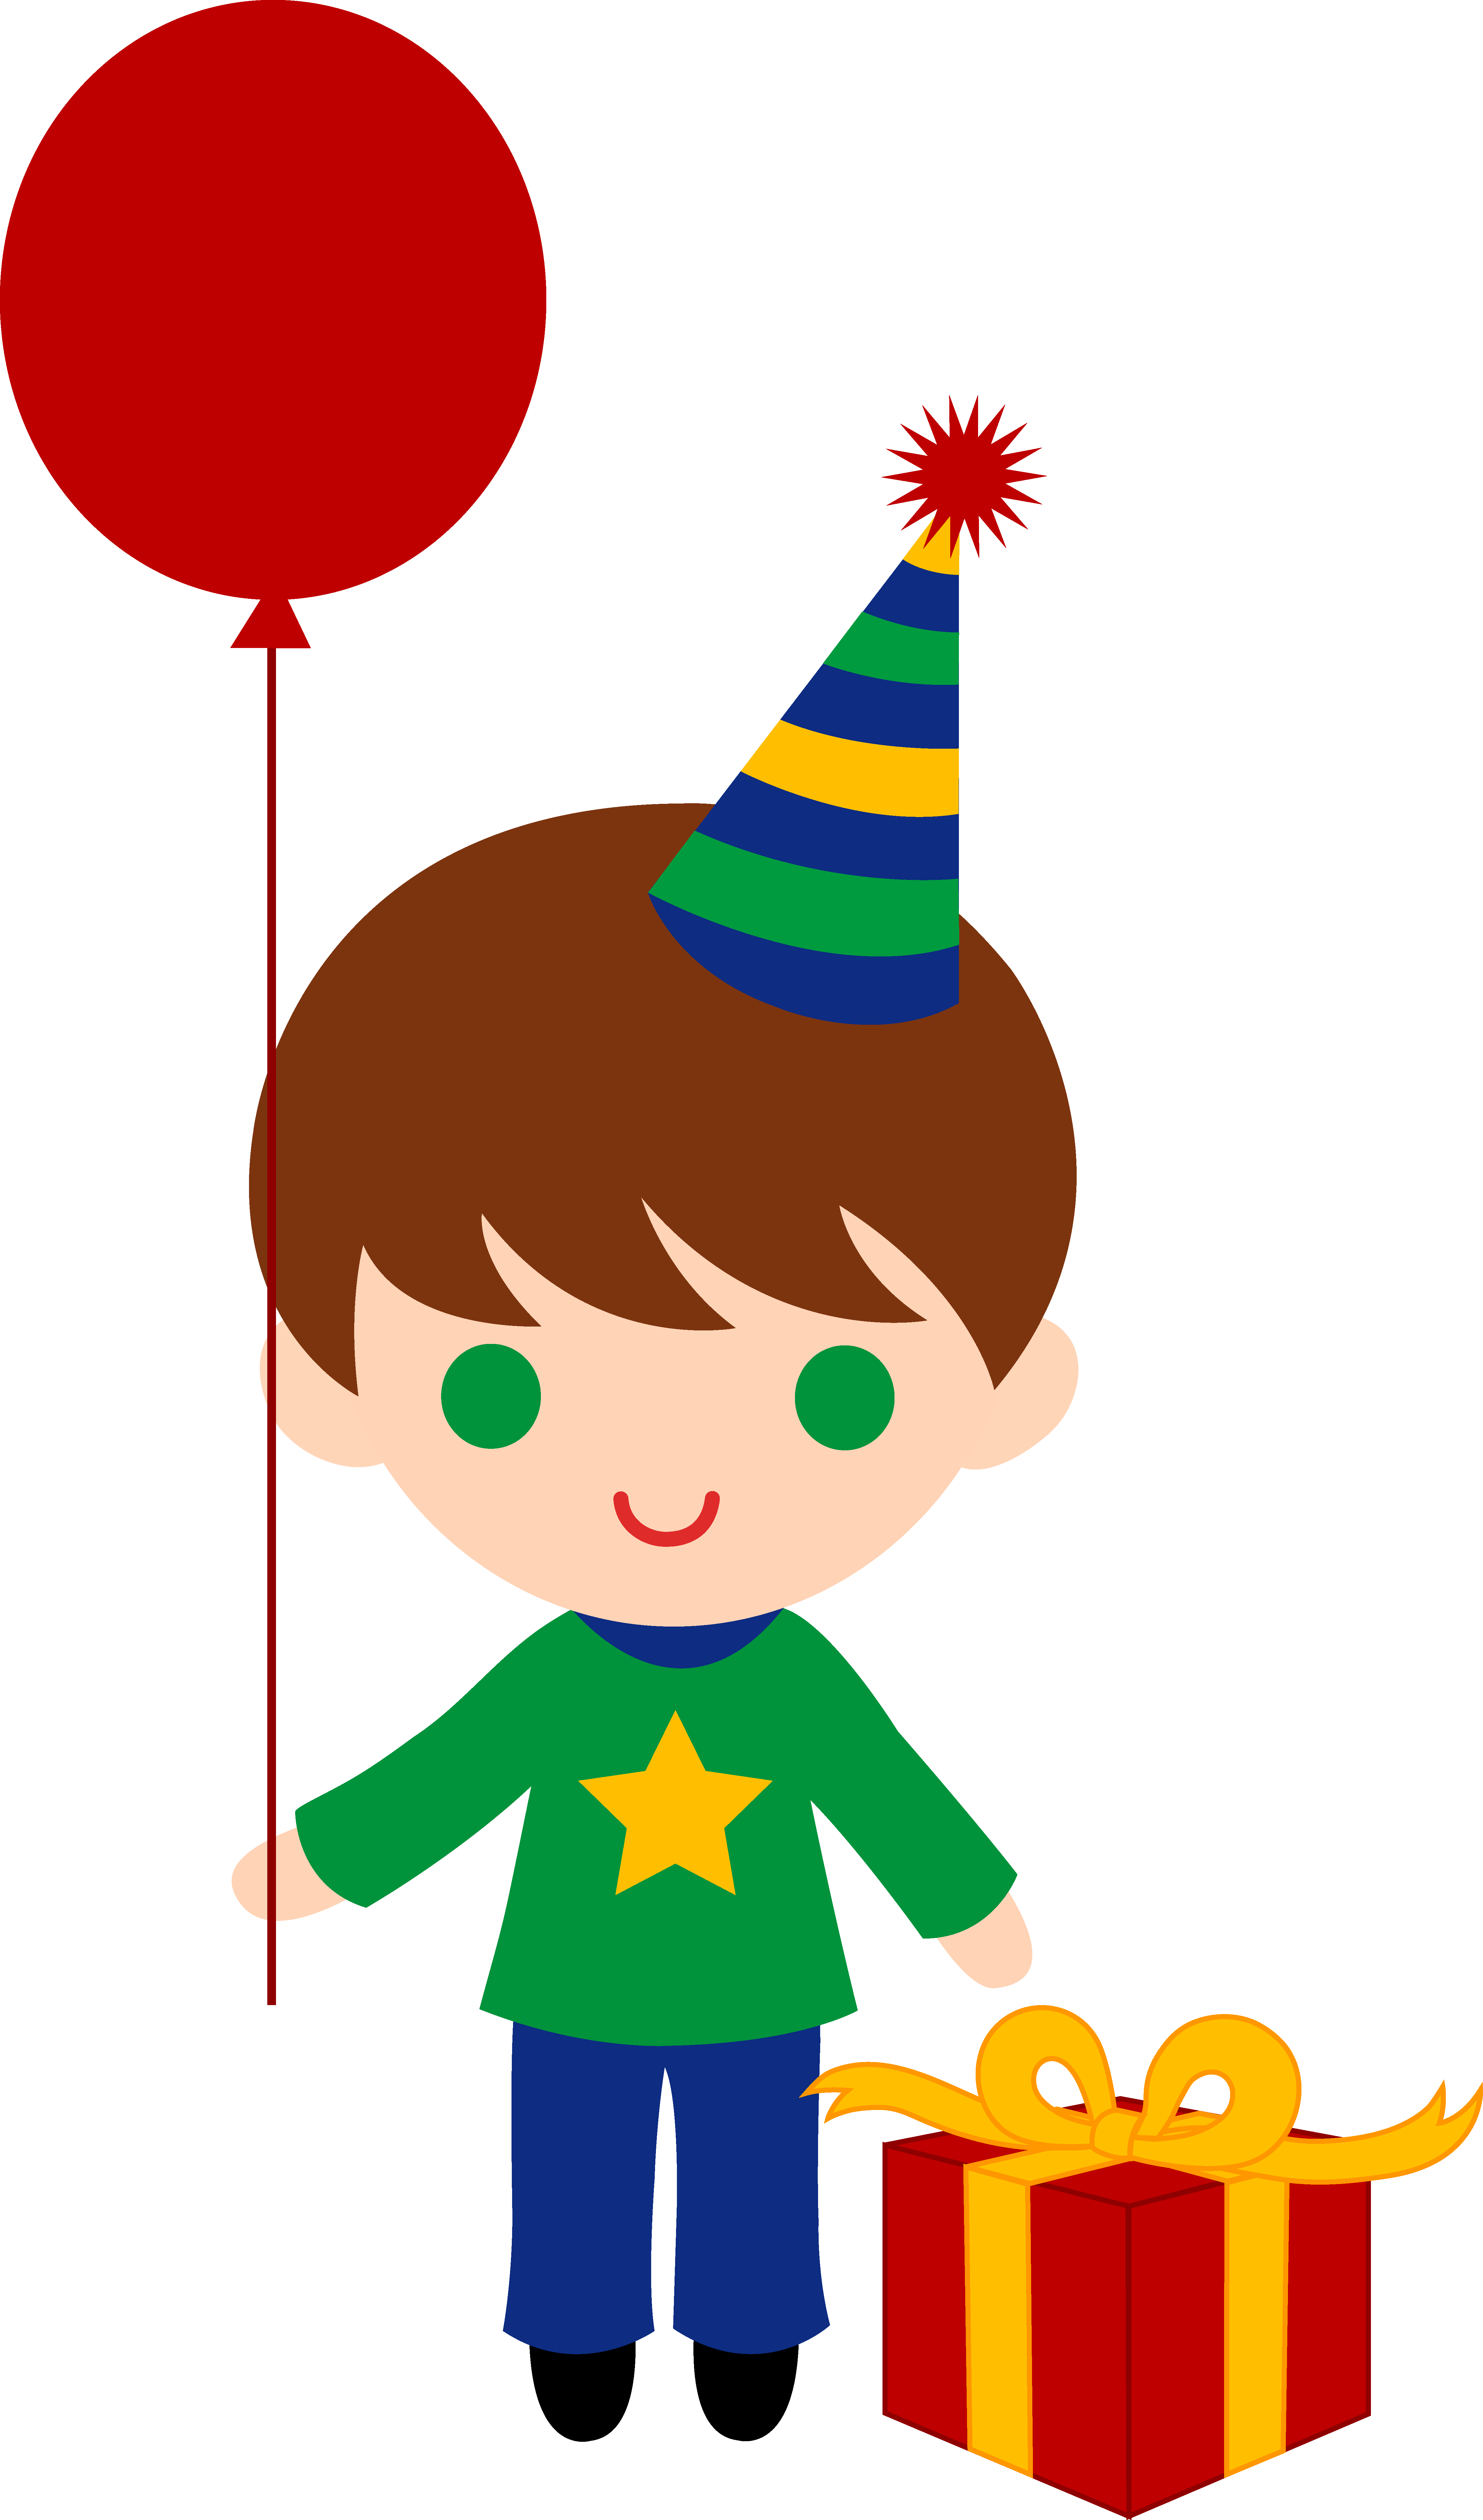 Kids At Birthday Party Clipart - ClipArt Best